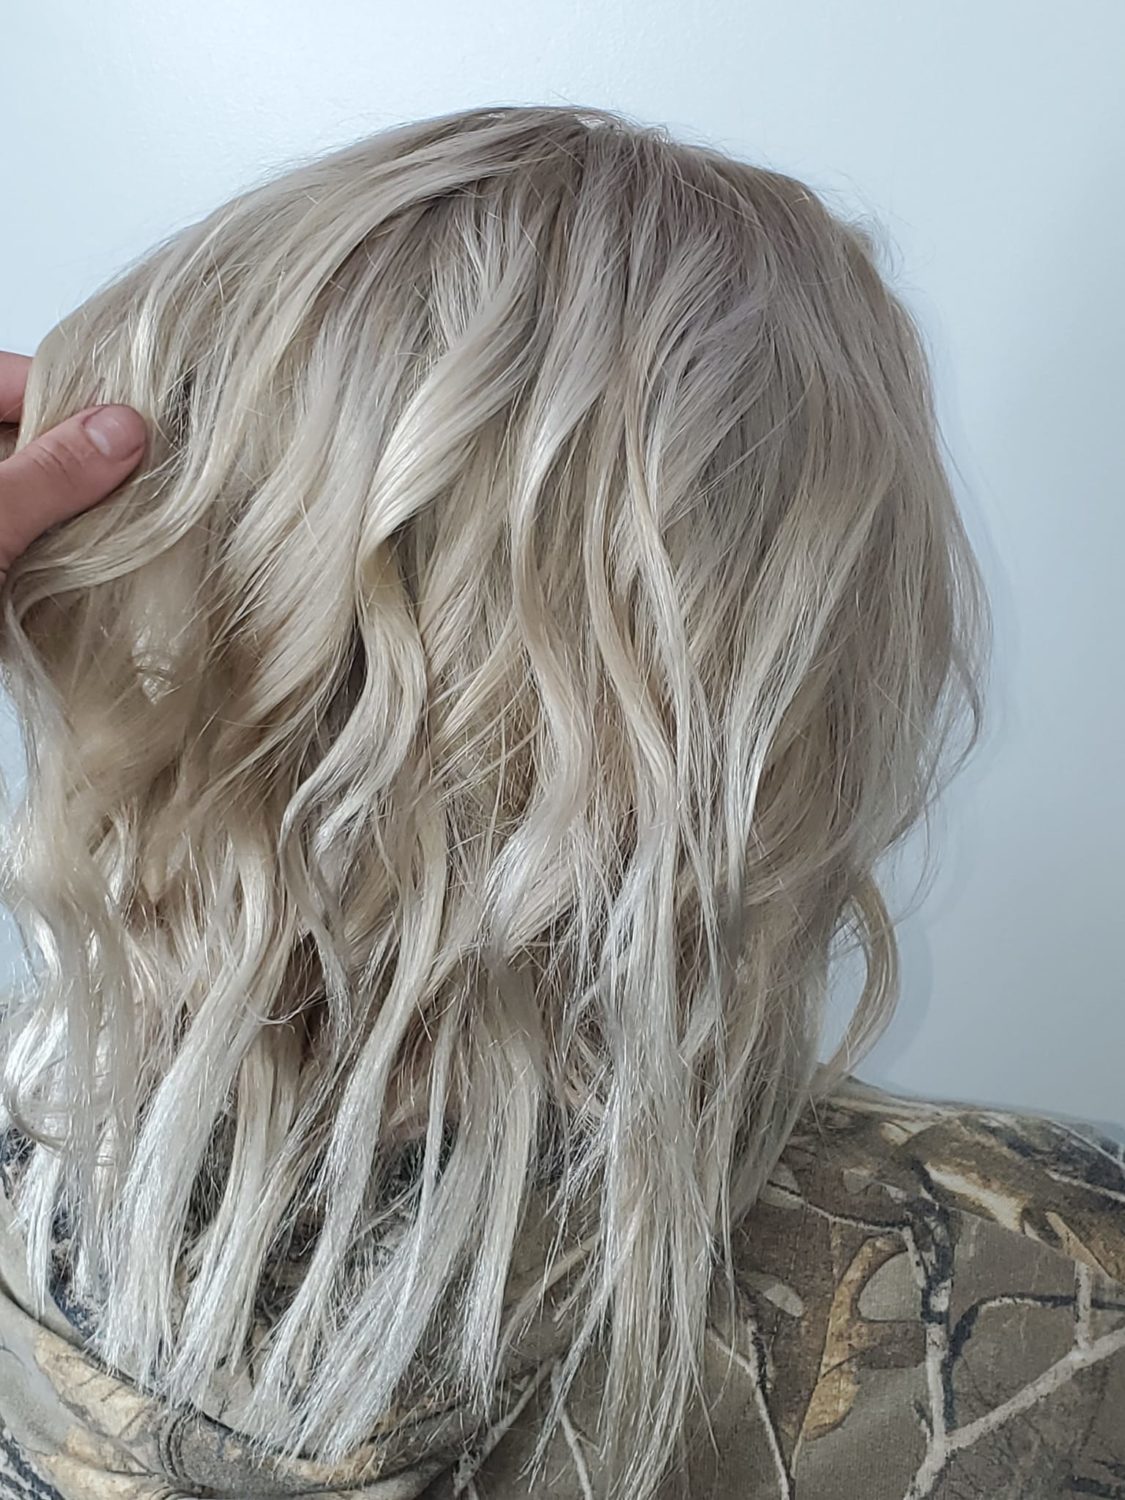 5 Reasons You're Going From Bombshell Blonde to Bleak Brassy